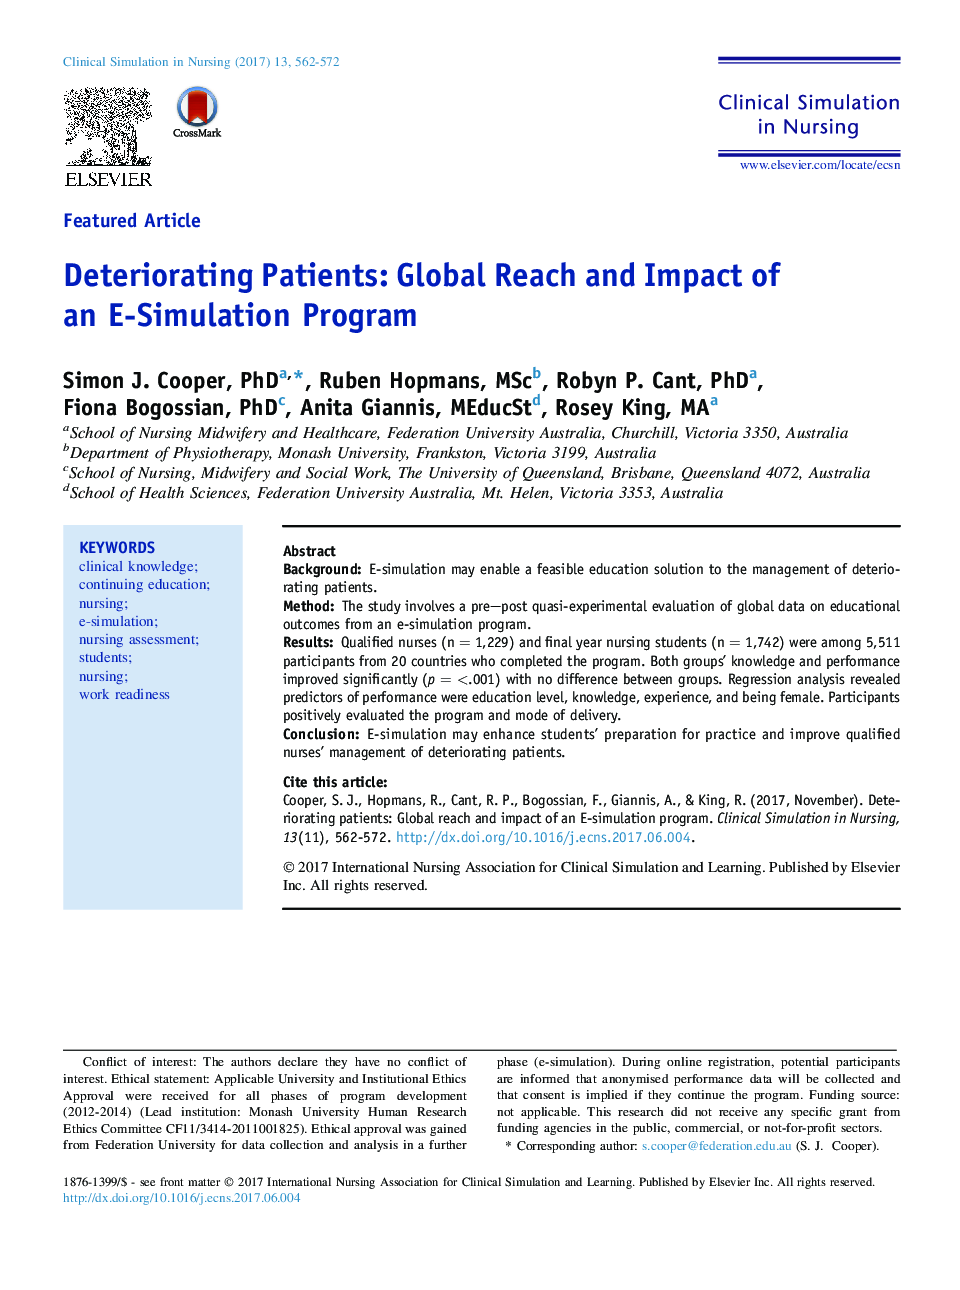 Deteriorating Patients: Global Reach and Impact of an E-Simulation Program